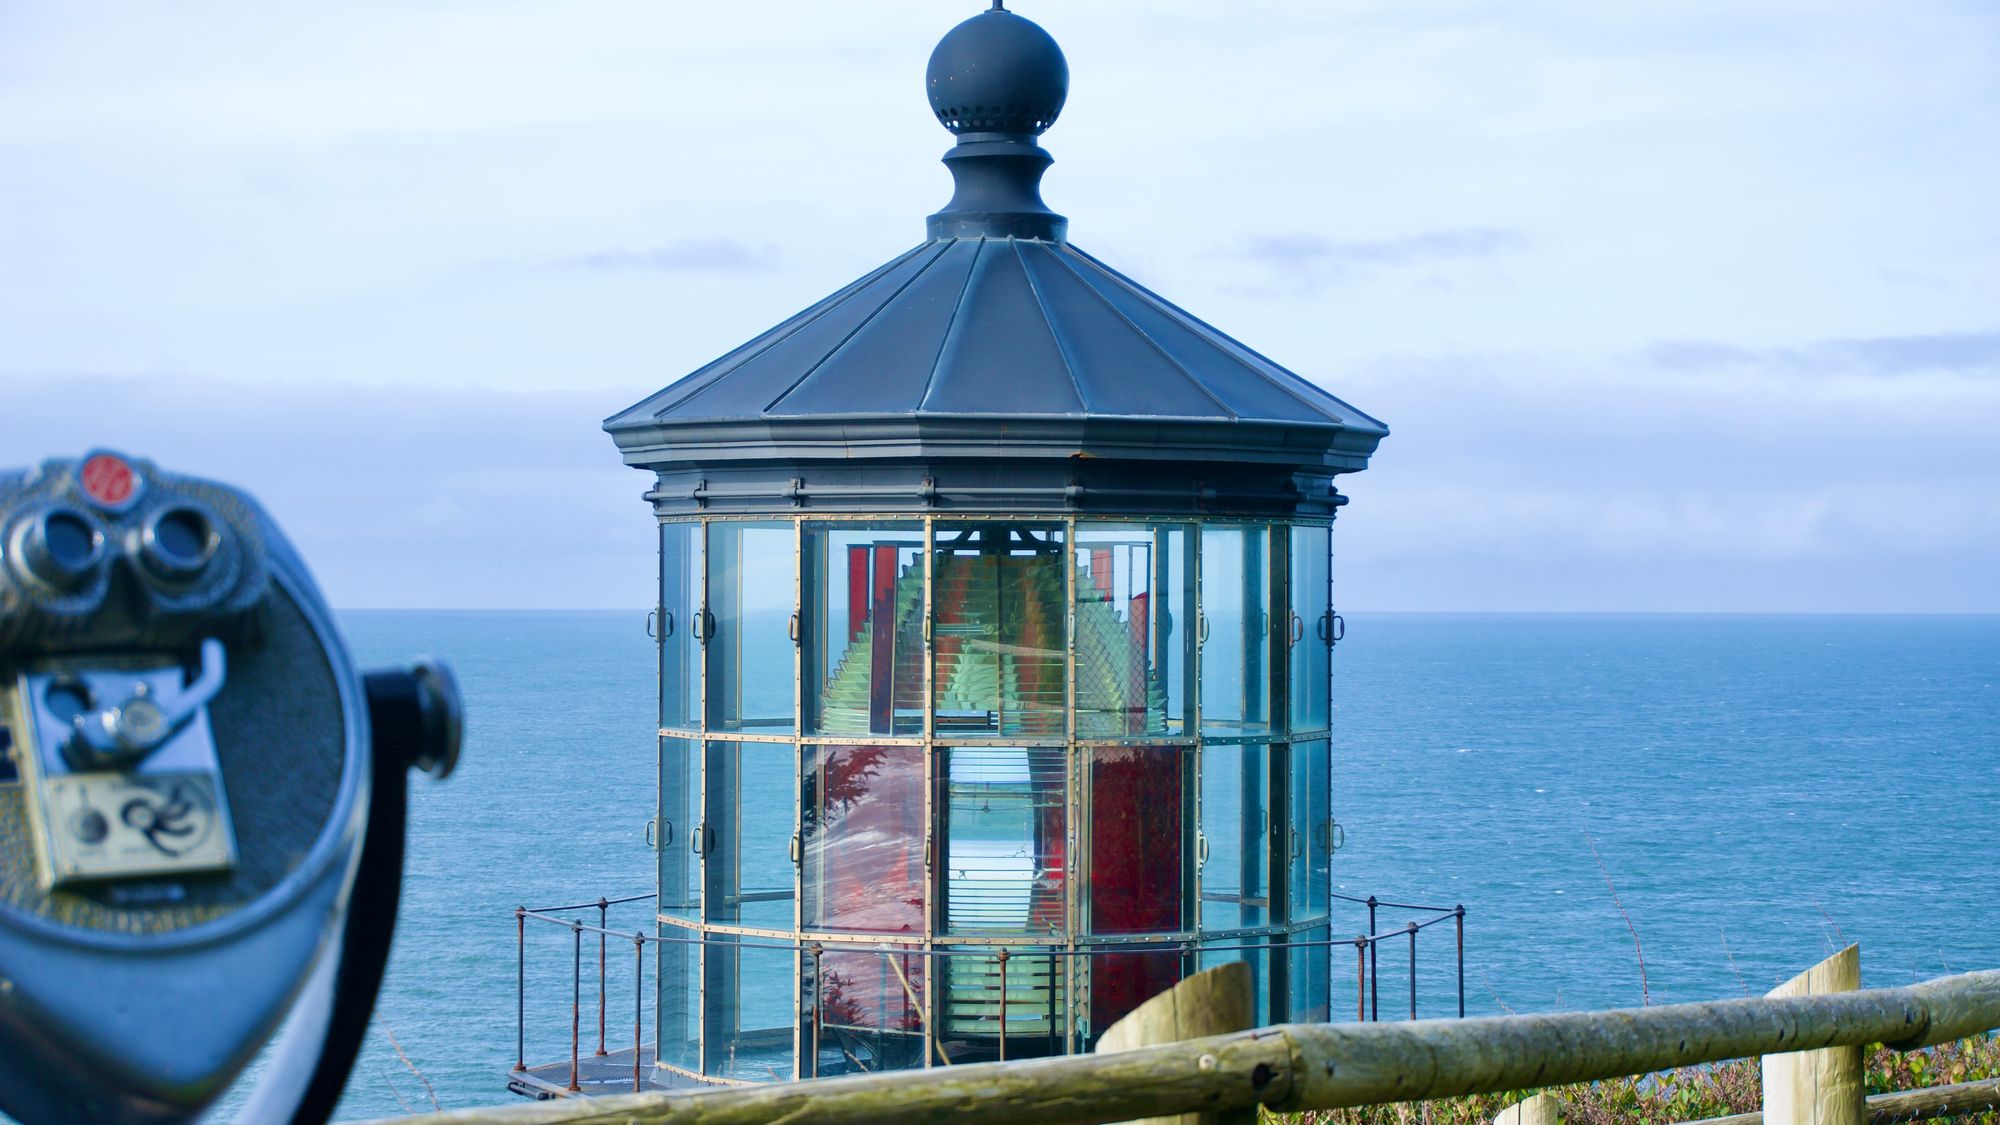 Cape Meares Lighthouse stands above the Pacific Ocean at a viewpoint in coastal Oregon